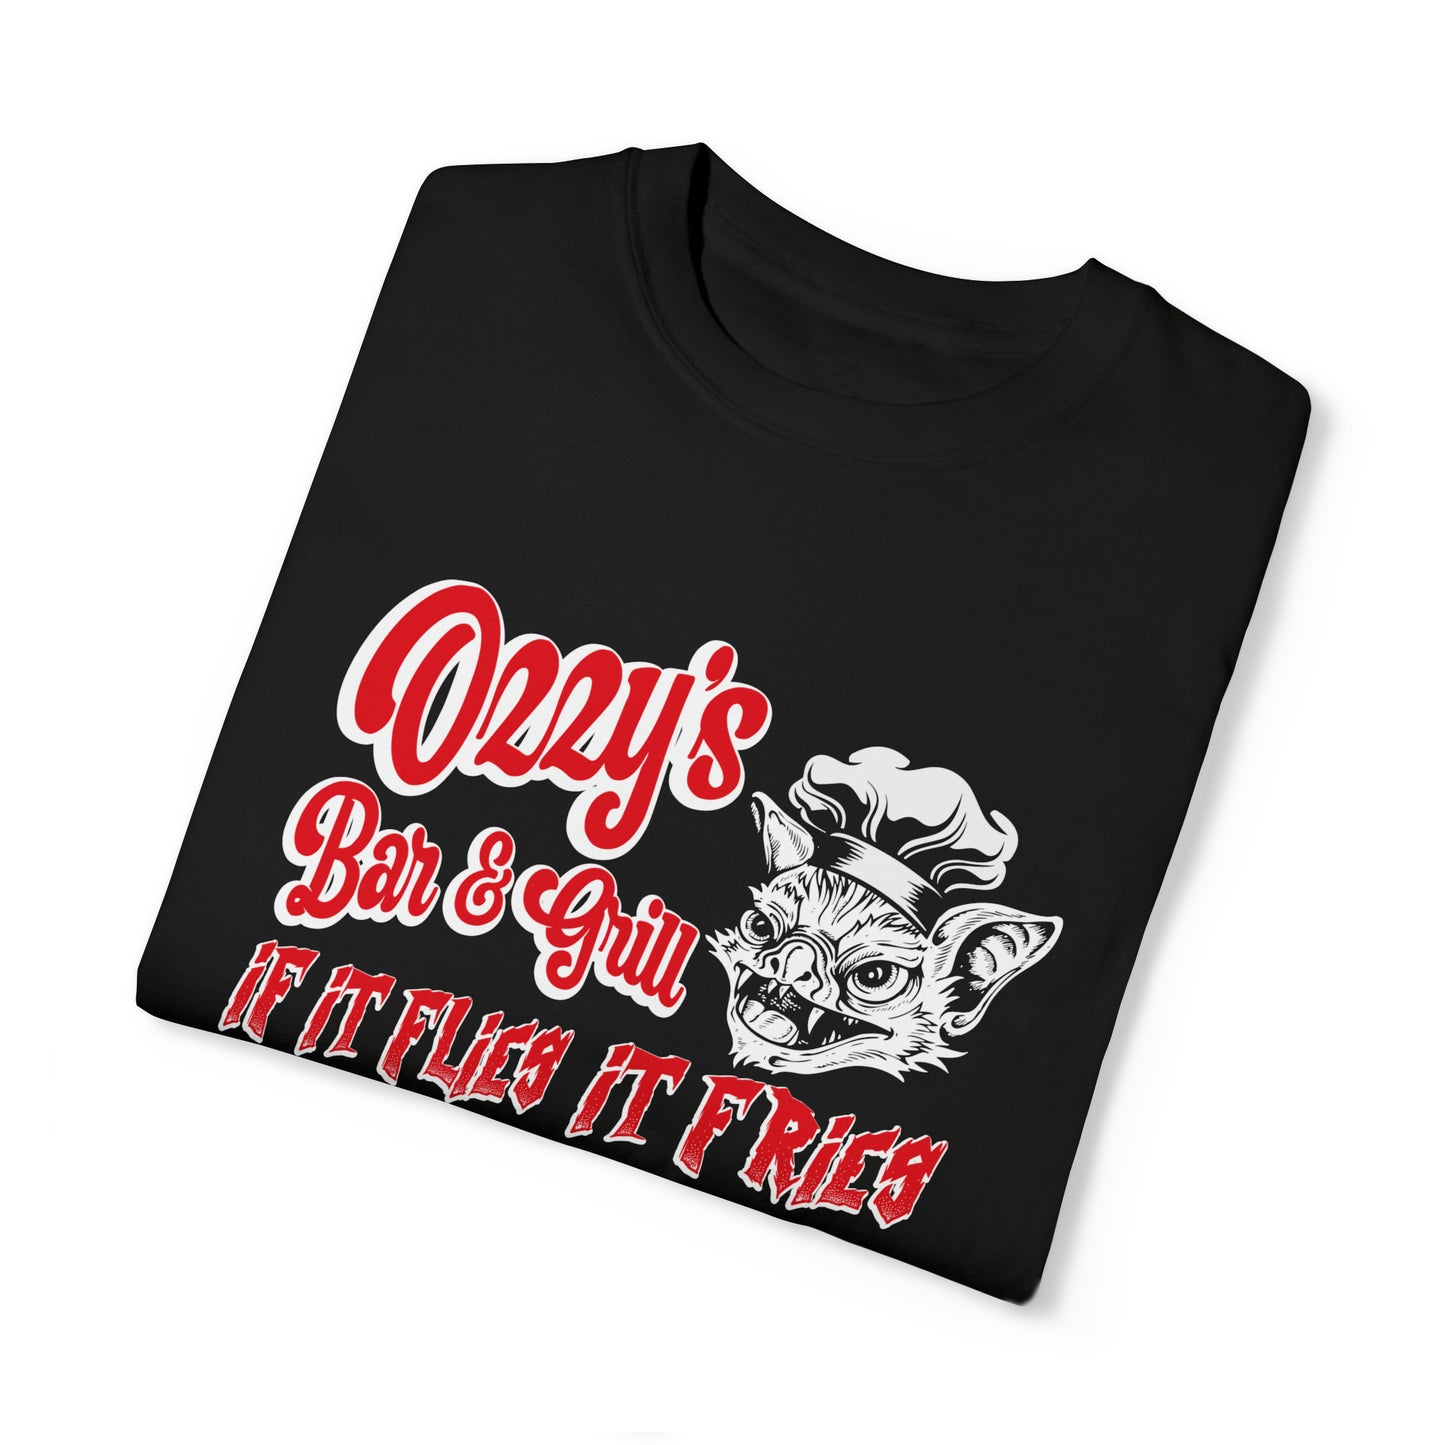 OZZY'S BAR & GRILL T-SHIRT